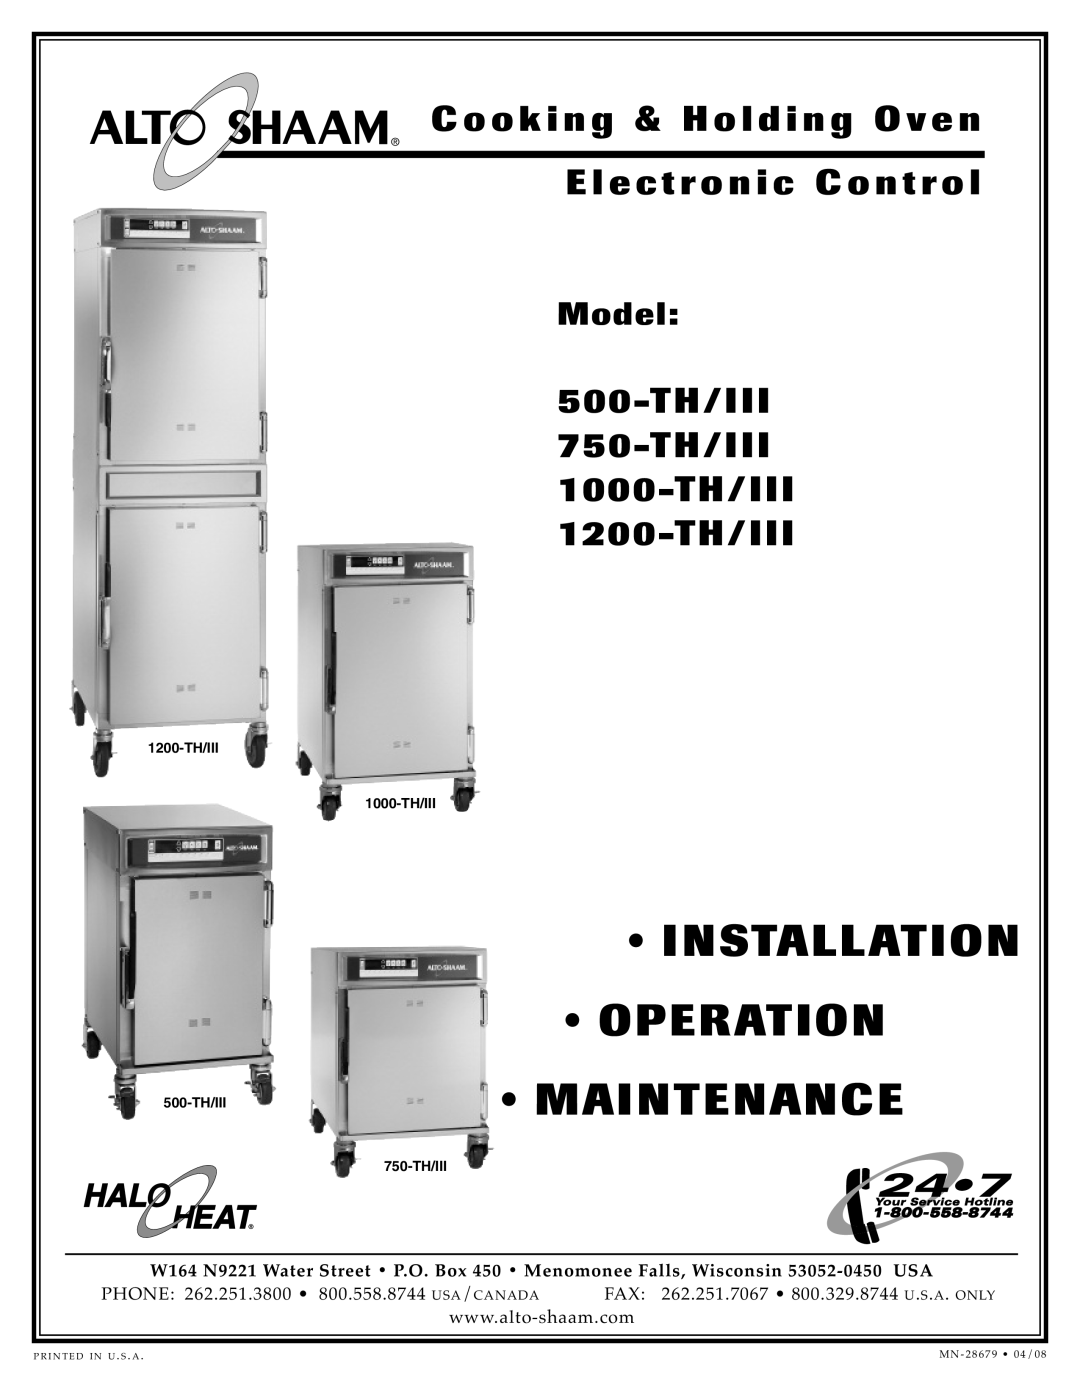 Alto-Shaam 500-TH/III manual Installation, Operation, Maintenance, Cooking & Holding Oven, Electronic Control, 750-TH/III 